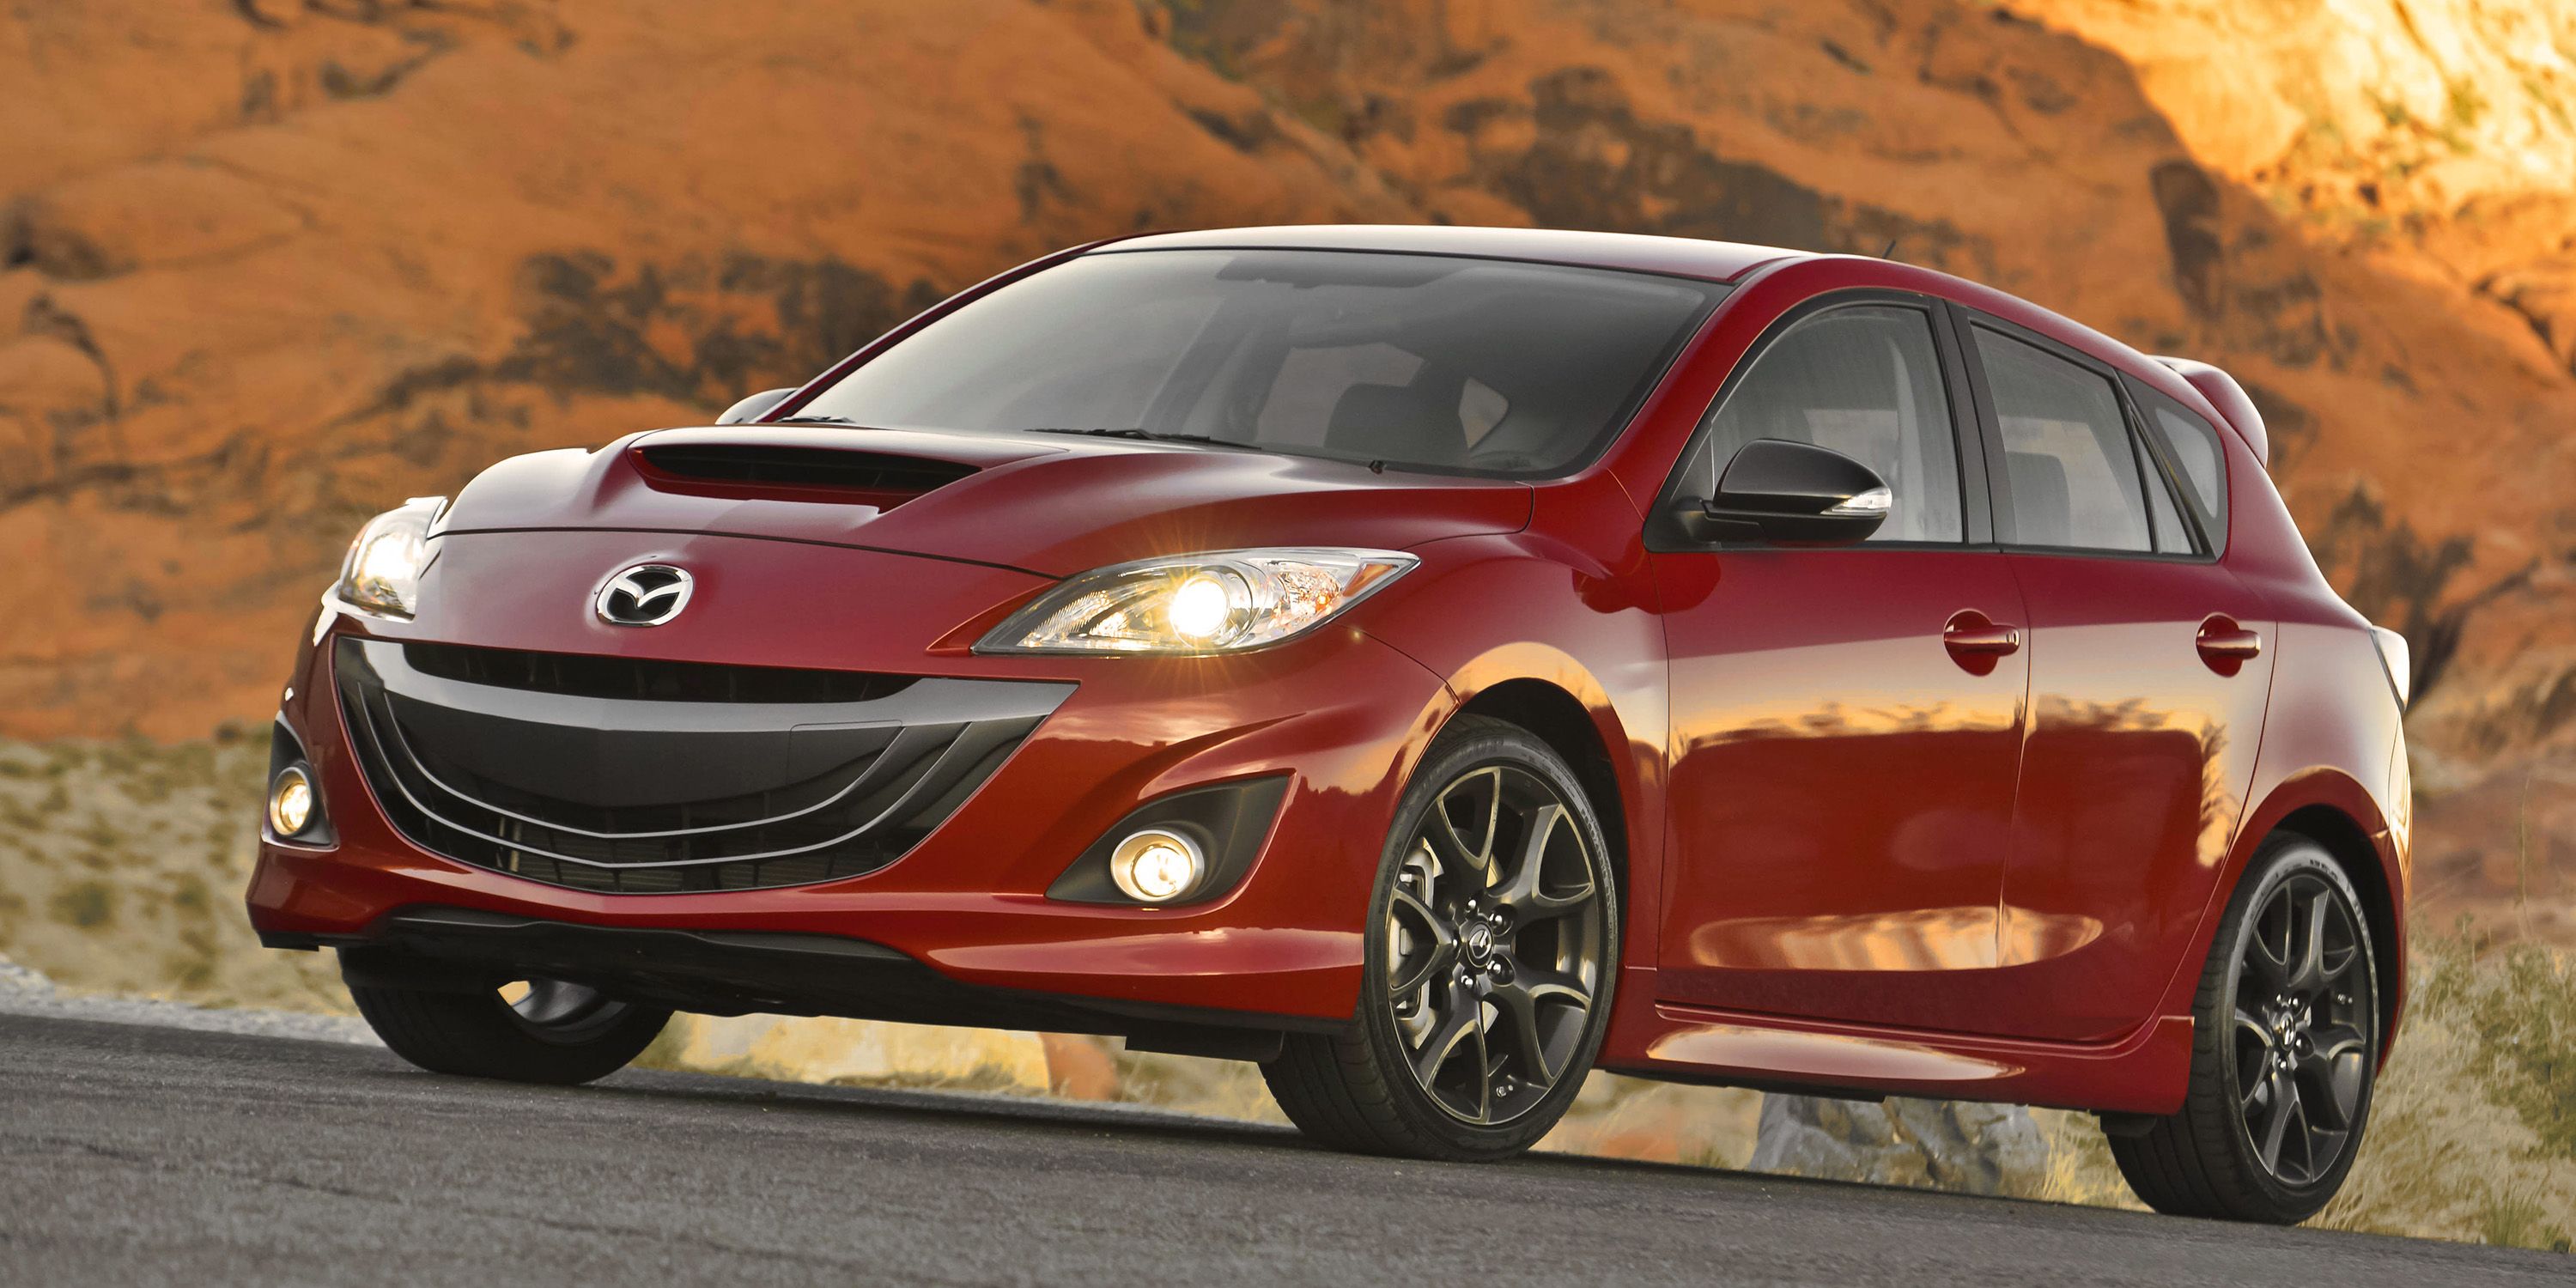 What Needs to Happen to Bring Mazdaspeed Back